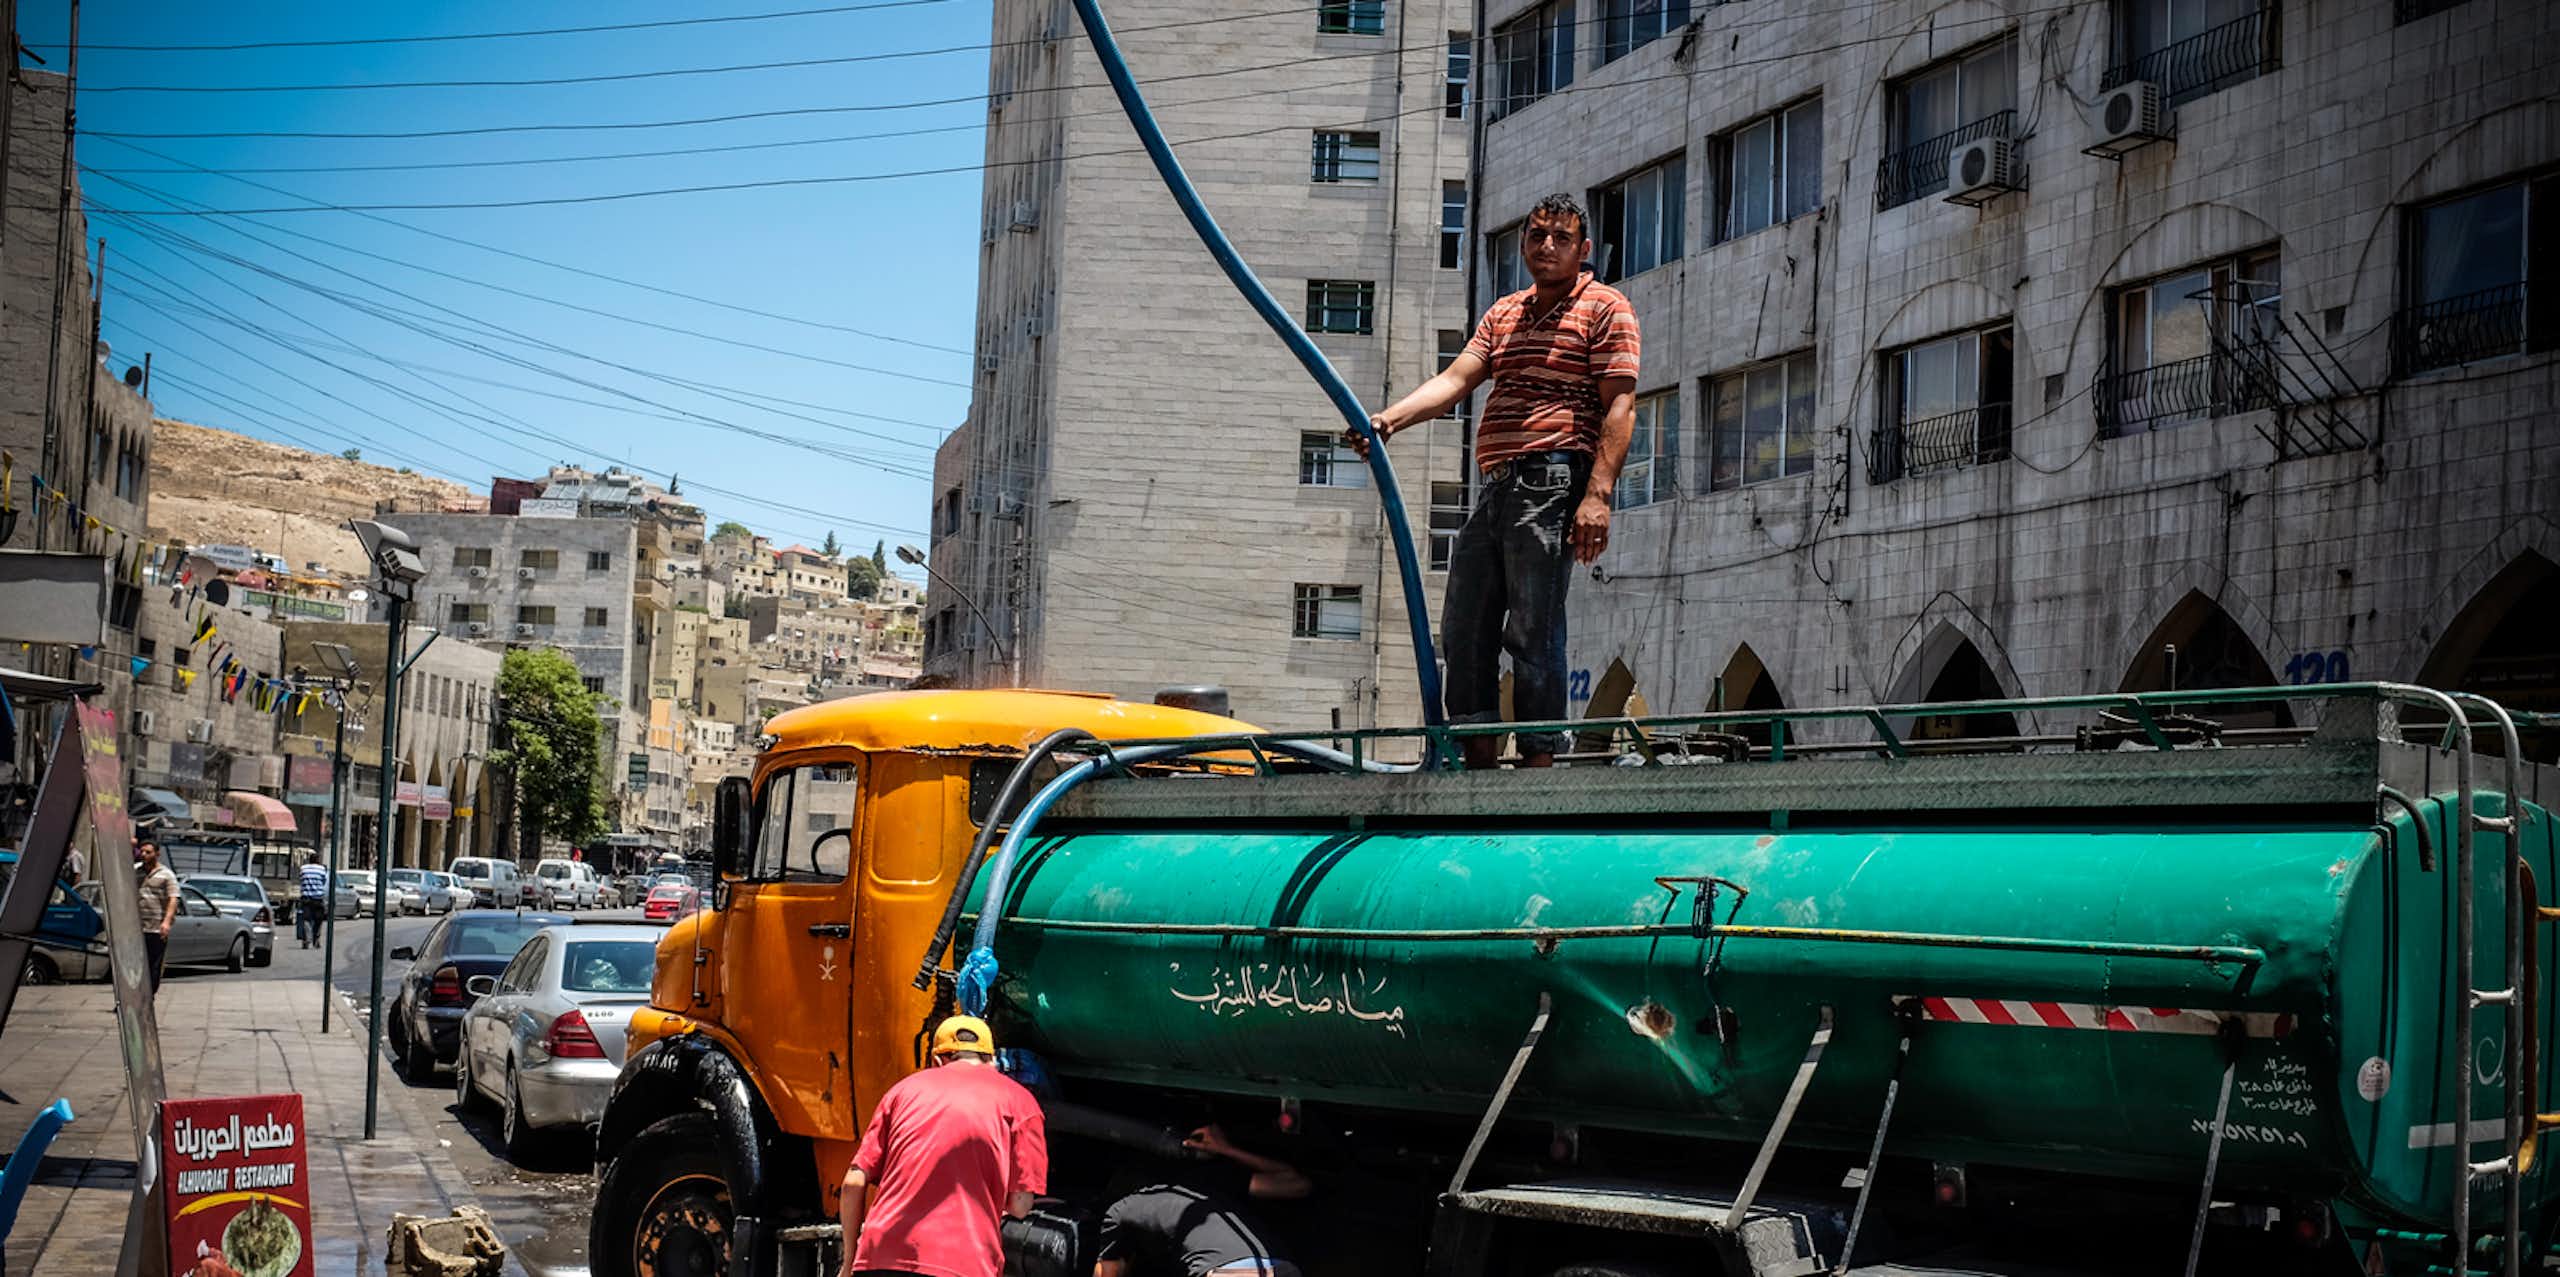 Climate crisis sees rise in illegal water markets in the Middle East